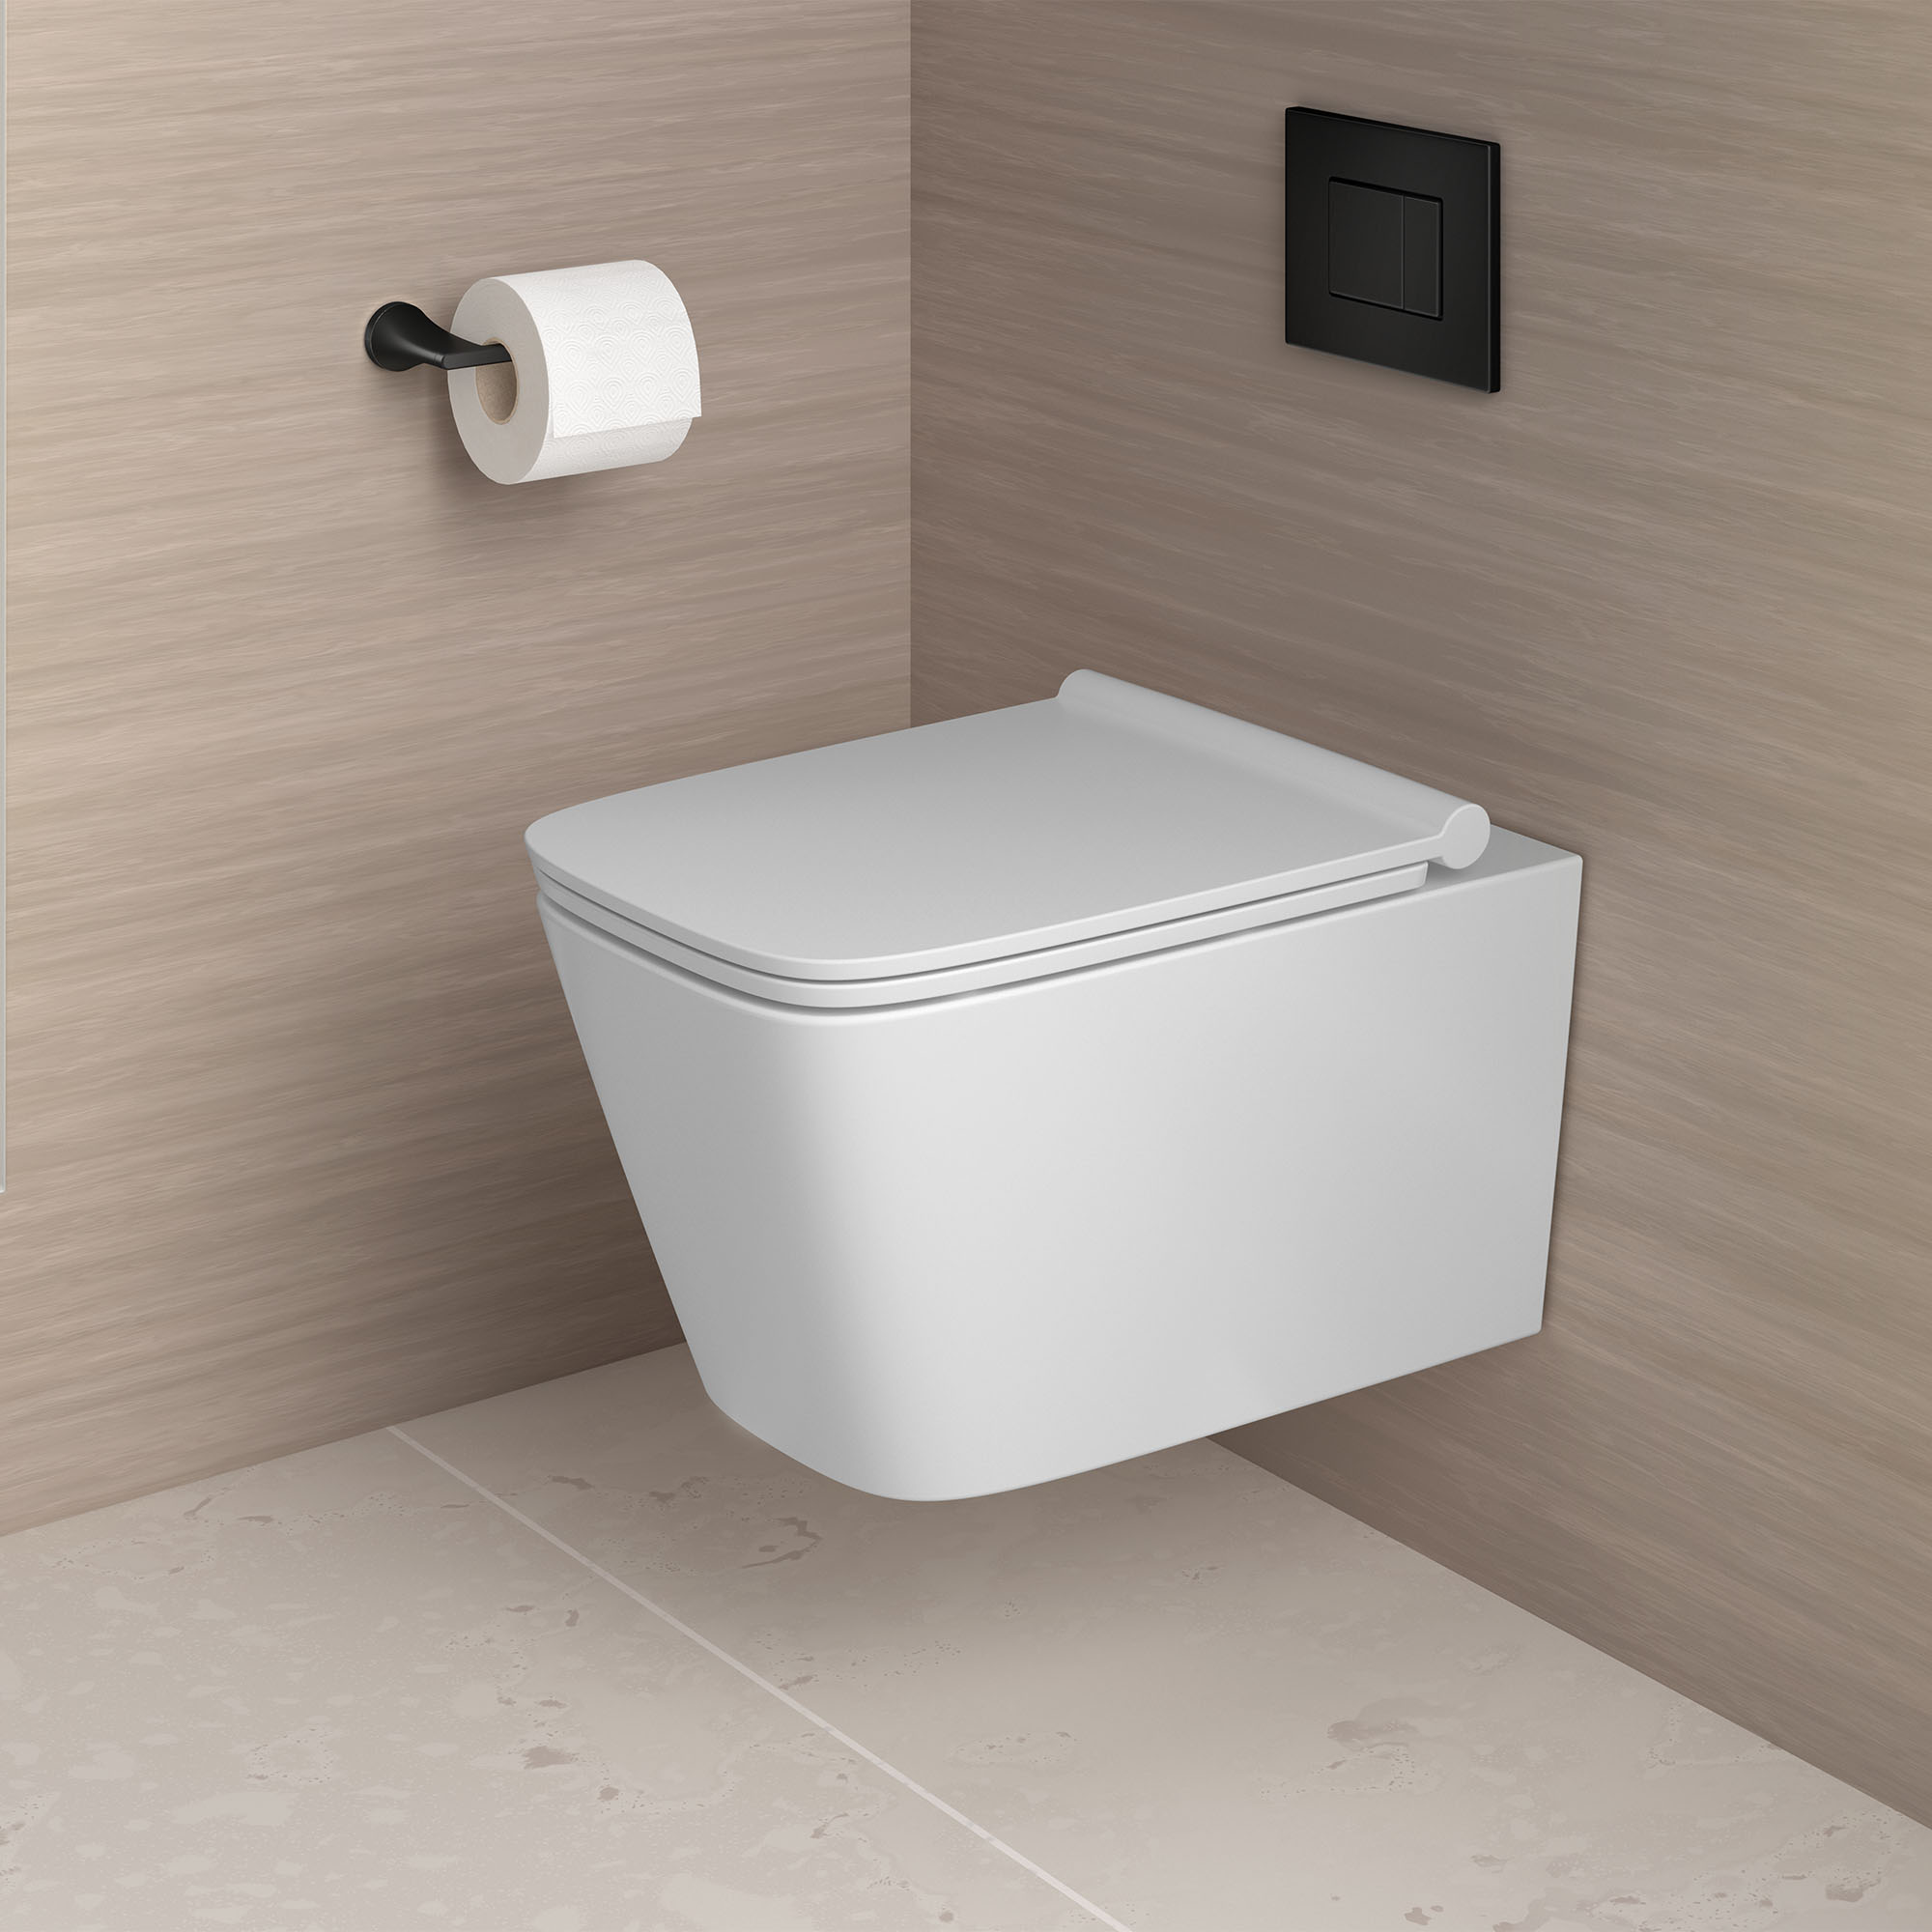 Konflikt madras Delegation DXV Modulus Wall-Hung Elongated Toilet Bowl with Seat